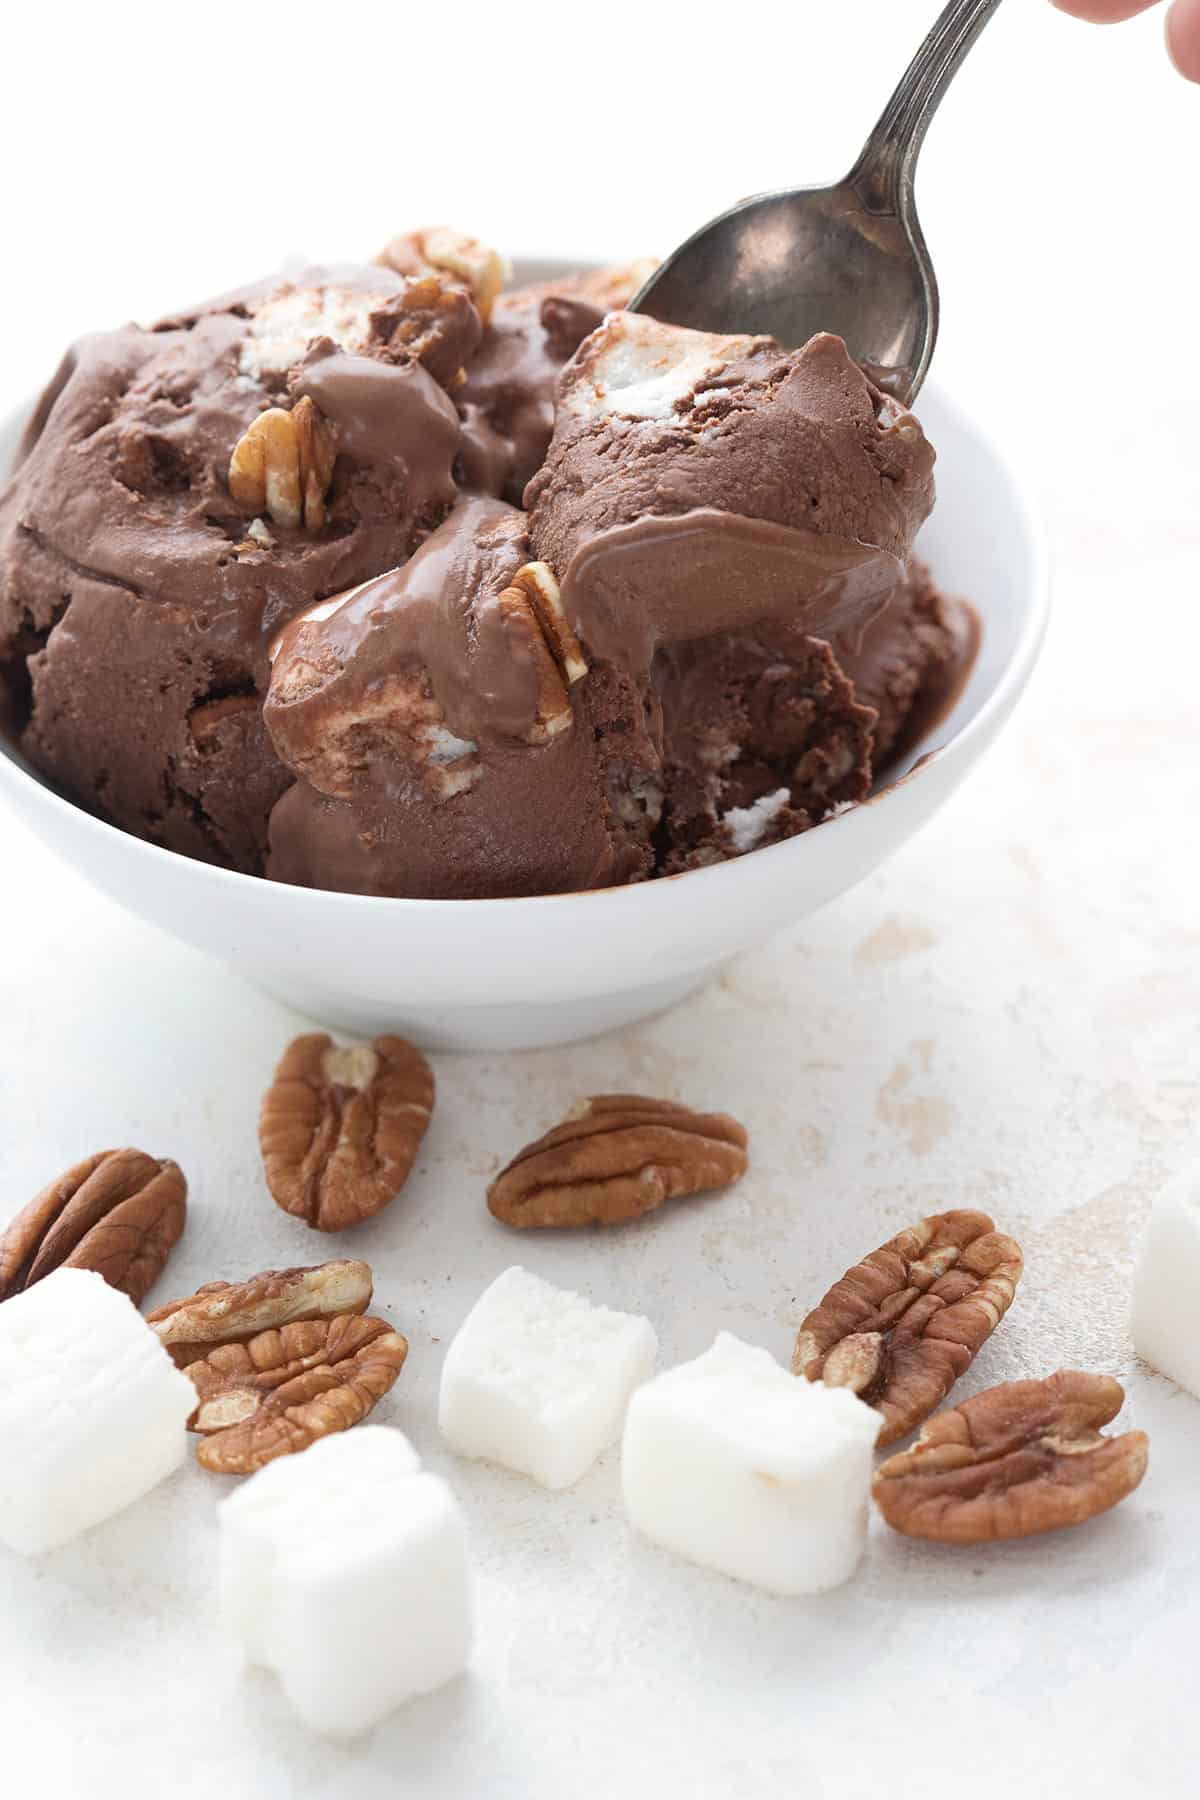 A bowl of keto rocky road ice cream with keto marshmallows and pecans in front.